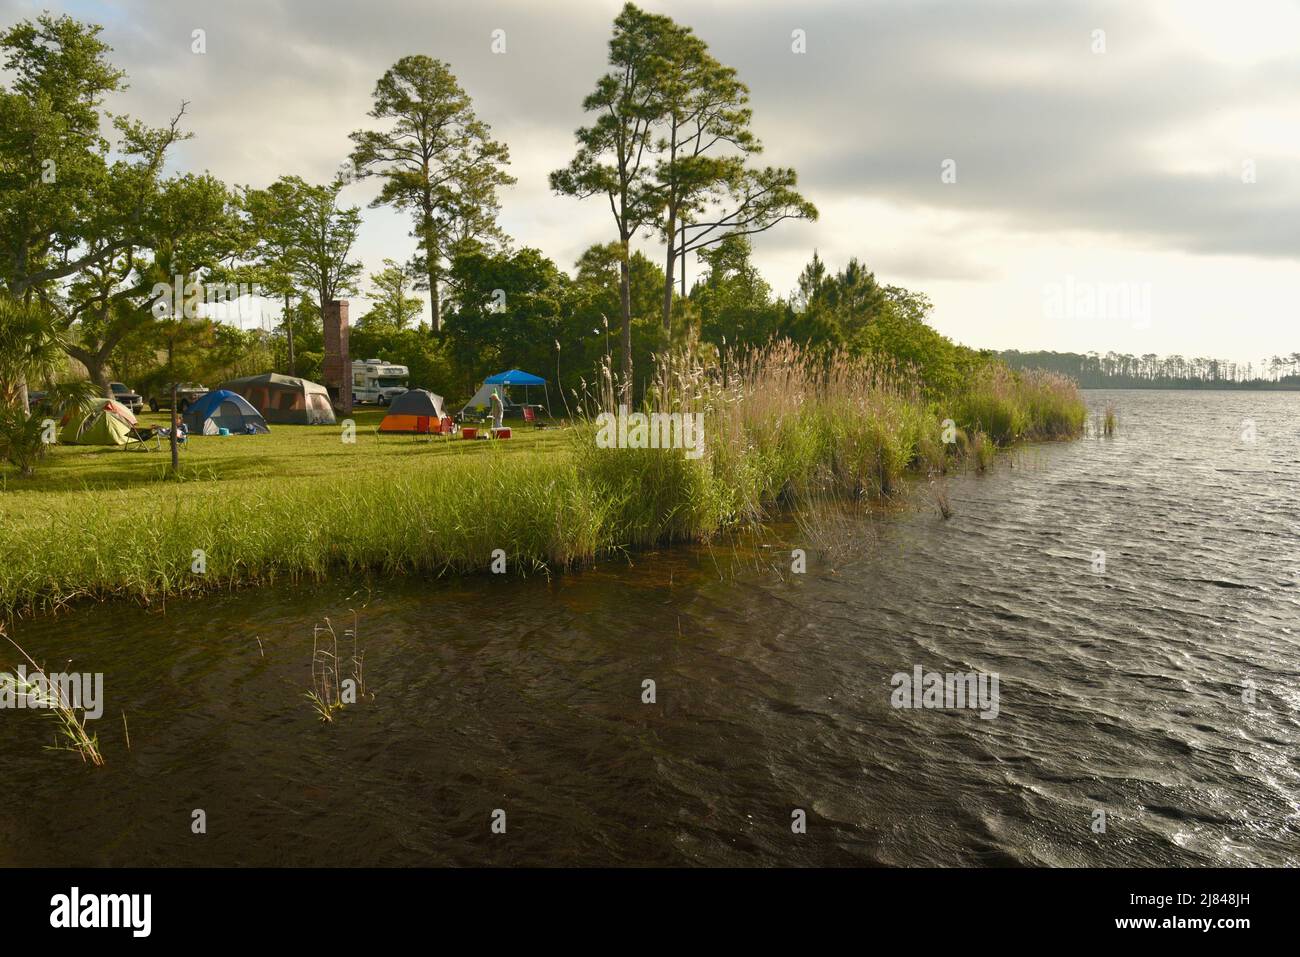 Cabin rental units and camping, water edge, along Lake Shelby in Gulf State Park, along coastline community of Gulf Shores, Alabama, USA Stock Photo